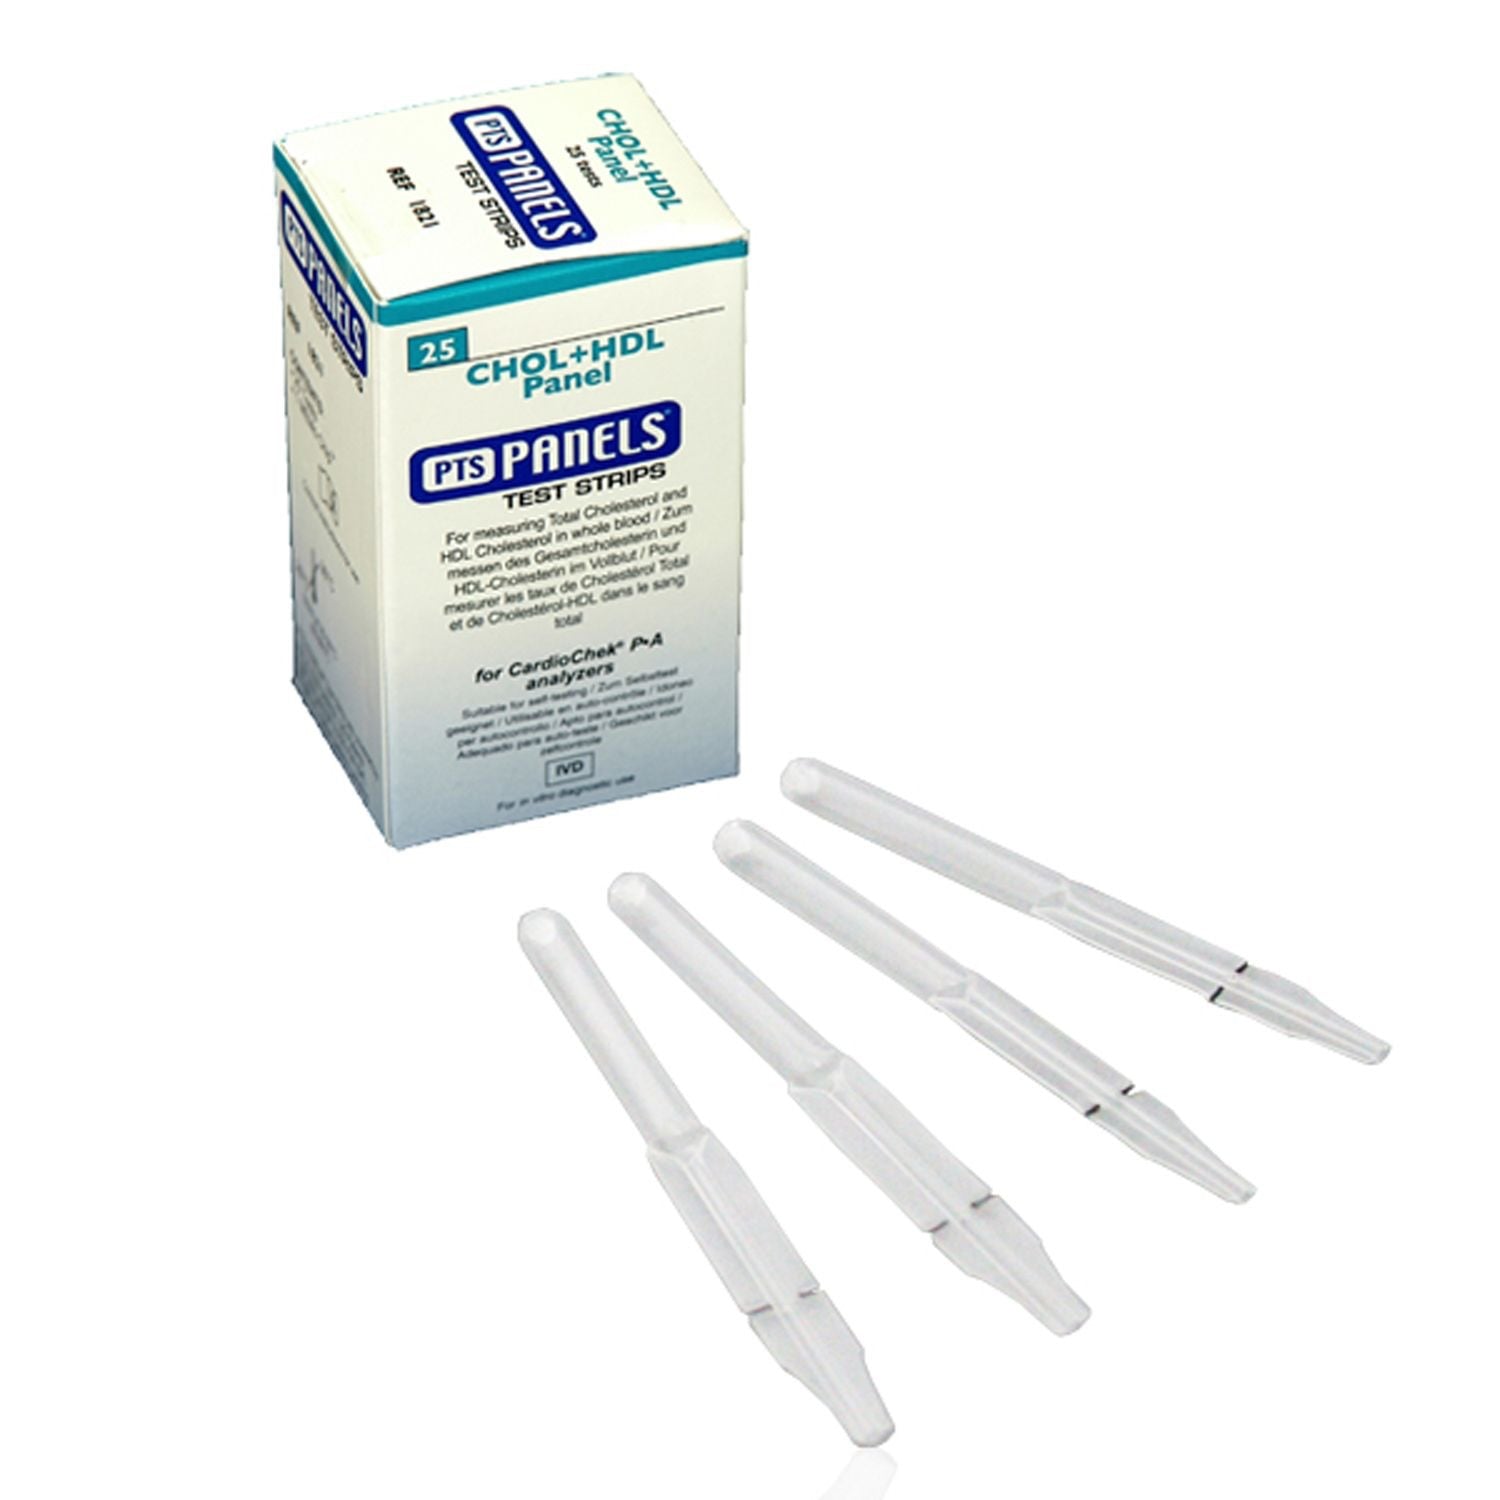 Cholesterol & HDL Duo Strips x25 & 30ul Pipette (25 Tests)